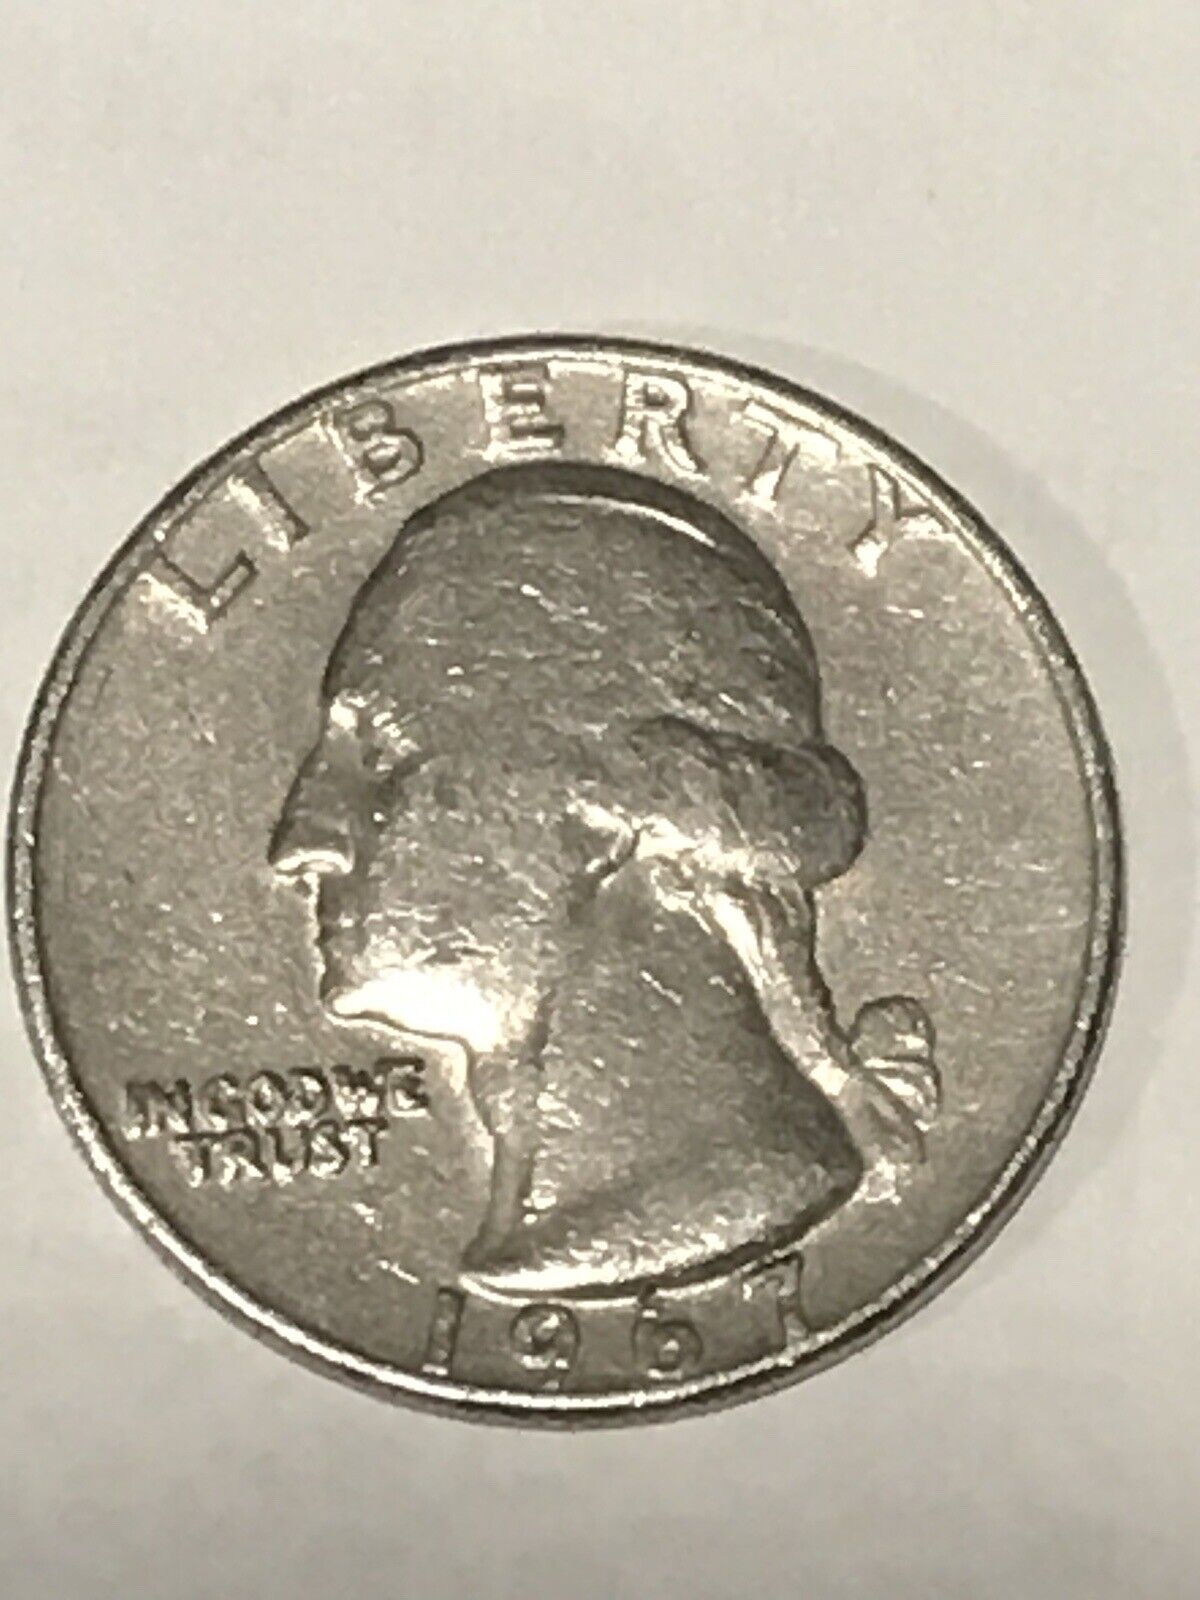 Extremely Rare 1967 Quarter No Mint Mark, Date on Rim, \